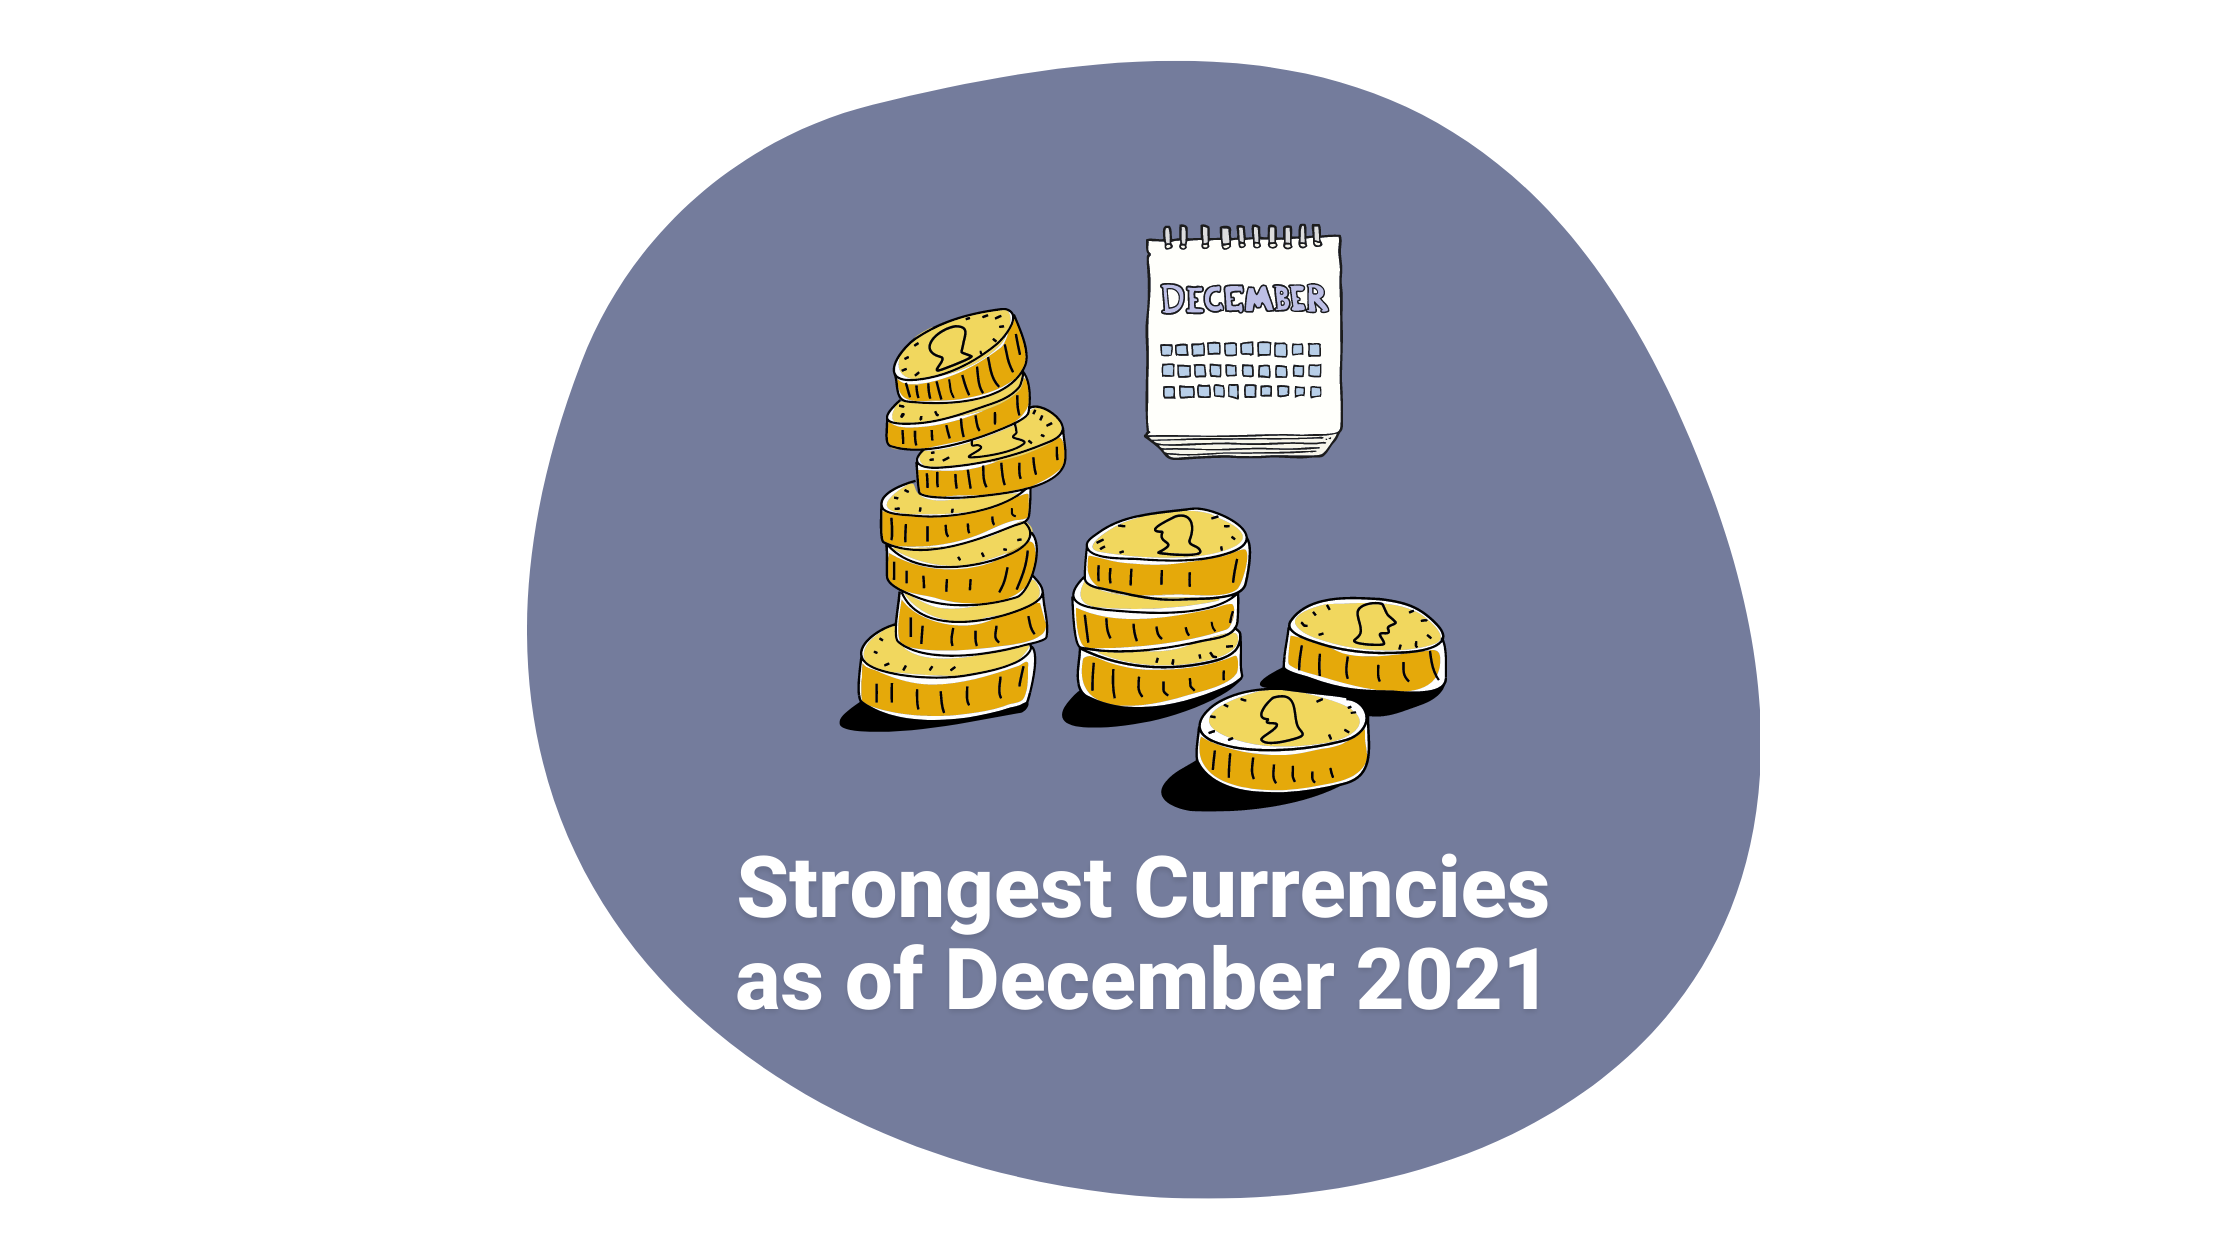 Strongest Currencies as of December 2021